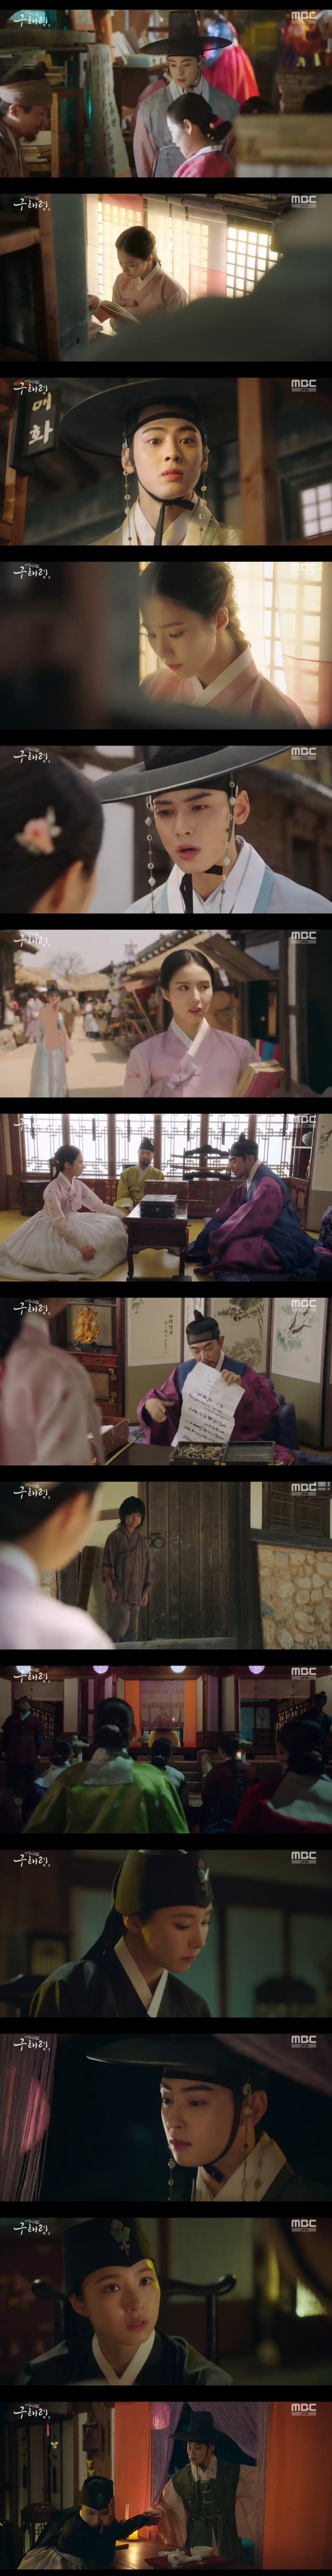 Seoul) = Na Hae-ryung Shin Se-kyung pretended to be Jung Eun-woo.In the MBC new drama Na Hae-ryung, which was broadcast on the afternoon of the 17th, Hanyangs problematic GLOW (Shin Se-kyung) in the 19th century was caught pretending to be Plum to the second-ranked Dowon Daegun Irim (Cha Jung Eun-woo).The plum is the pseudonym of Irim. Irim, who is a love novelist, received a hot response after publishing three monthly meetings.But in the 19th century, Hanyangs problematic GLOW, Na Hae-ryung, criticized the book, saying to Irim, The book was so boring, I almost fell asleep.Irim was embarrassed and asked, Why do not you like plum books?Na Hae-ryung asked, Do you have to like it? Irim asked again, I am curious. The sentence is beautiful, the characters are full of liveliness, but what is lacking?When asked about Irims persistent question, Koo Na Hae-ryung explained why: Thats why I dont like plum books.I can not count one because I have so many, he said. I also cried with my heart three times while reading this book.I am afraid that the expensive paper in this book is so bad that the futile delusions of the author, Plum, are spreading to the city. Irim was shocked to hear that I am a man without conscience to publish such a book. If I have a conscience, I should make a pencil.In particular, Na Hae-ryung told Lee Rim, Read one more librarian and broaden your insight.Do not spend time on a novel, he said. The more suspicious you are, the more doubtful you are.Please step aside, he said, and patted him on the shoulder and passed.Since then, Na Hae-ryung has been forced to make a plum.When Kim Jeong-gyun Skyla Novea came to know the pity, the head of the waltz (Lee Jong-hyuk) suggested to Koo Na Hae-ryung that if you pretend to be a plum, you will get rid of the Skyla Novea document.As soon as I heard this, Na Hae-ryung said, Are you asking me to pretend to be a plum?I am not so good enough to read the novel, and I am not a rotten person to meet these guys.But eventually, I was convinced that I would get rid of the Skyla Novea document and turned into a plum.With the help of Na Hae-ryung, Kim Jin-gyun became a free body.Later, Na Hae-ryung had a public reading of the Plum novels. GLOW were excited, and even signed autographs.It was Irim, the real plum.He asked Koo Na Hae-ryung, I have a question: What did you think of that beautiful scene where Kim Do-ryeong confesses his coalition under cherry blossoms?That was a very deep impression of going to the Yudal Mountain cruise last year, said Na Hae-ryung.Irim laughed and said, Yudalsan. No? And then, Plum. Would you write my name Plum? Two people who saw each others faces.Na Hae-ryung hurriedly covered his face, but Irim recognized him, saying, Are you a wanja? Attention is focusing on what relationship the two will develop in the future.Meanwhile, Na Hae-ryung, a drama about the first problematic first lady () of Joseon and the Phil full romance annals of Prince Irim, the anti-war mother Solo, will be broadcast every Wednesday and Thursday at 8:55 pm.